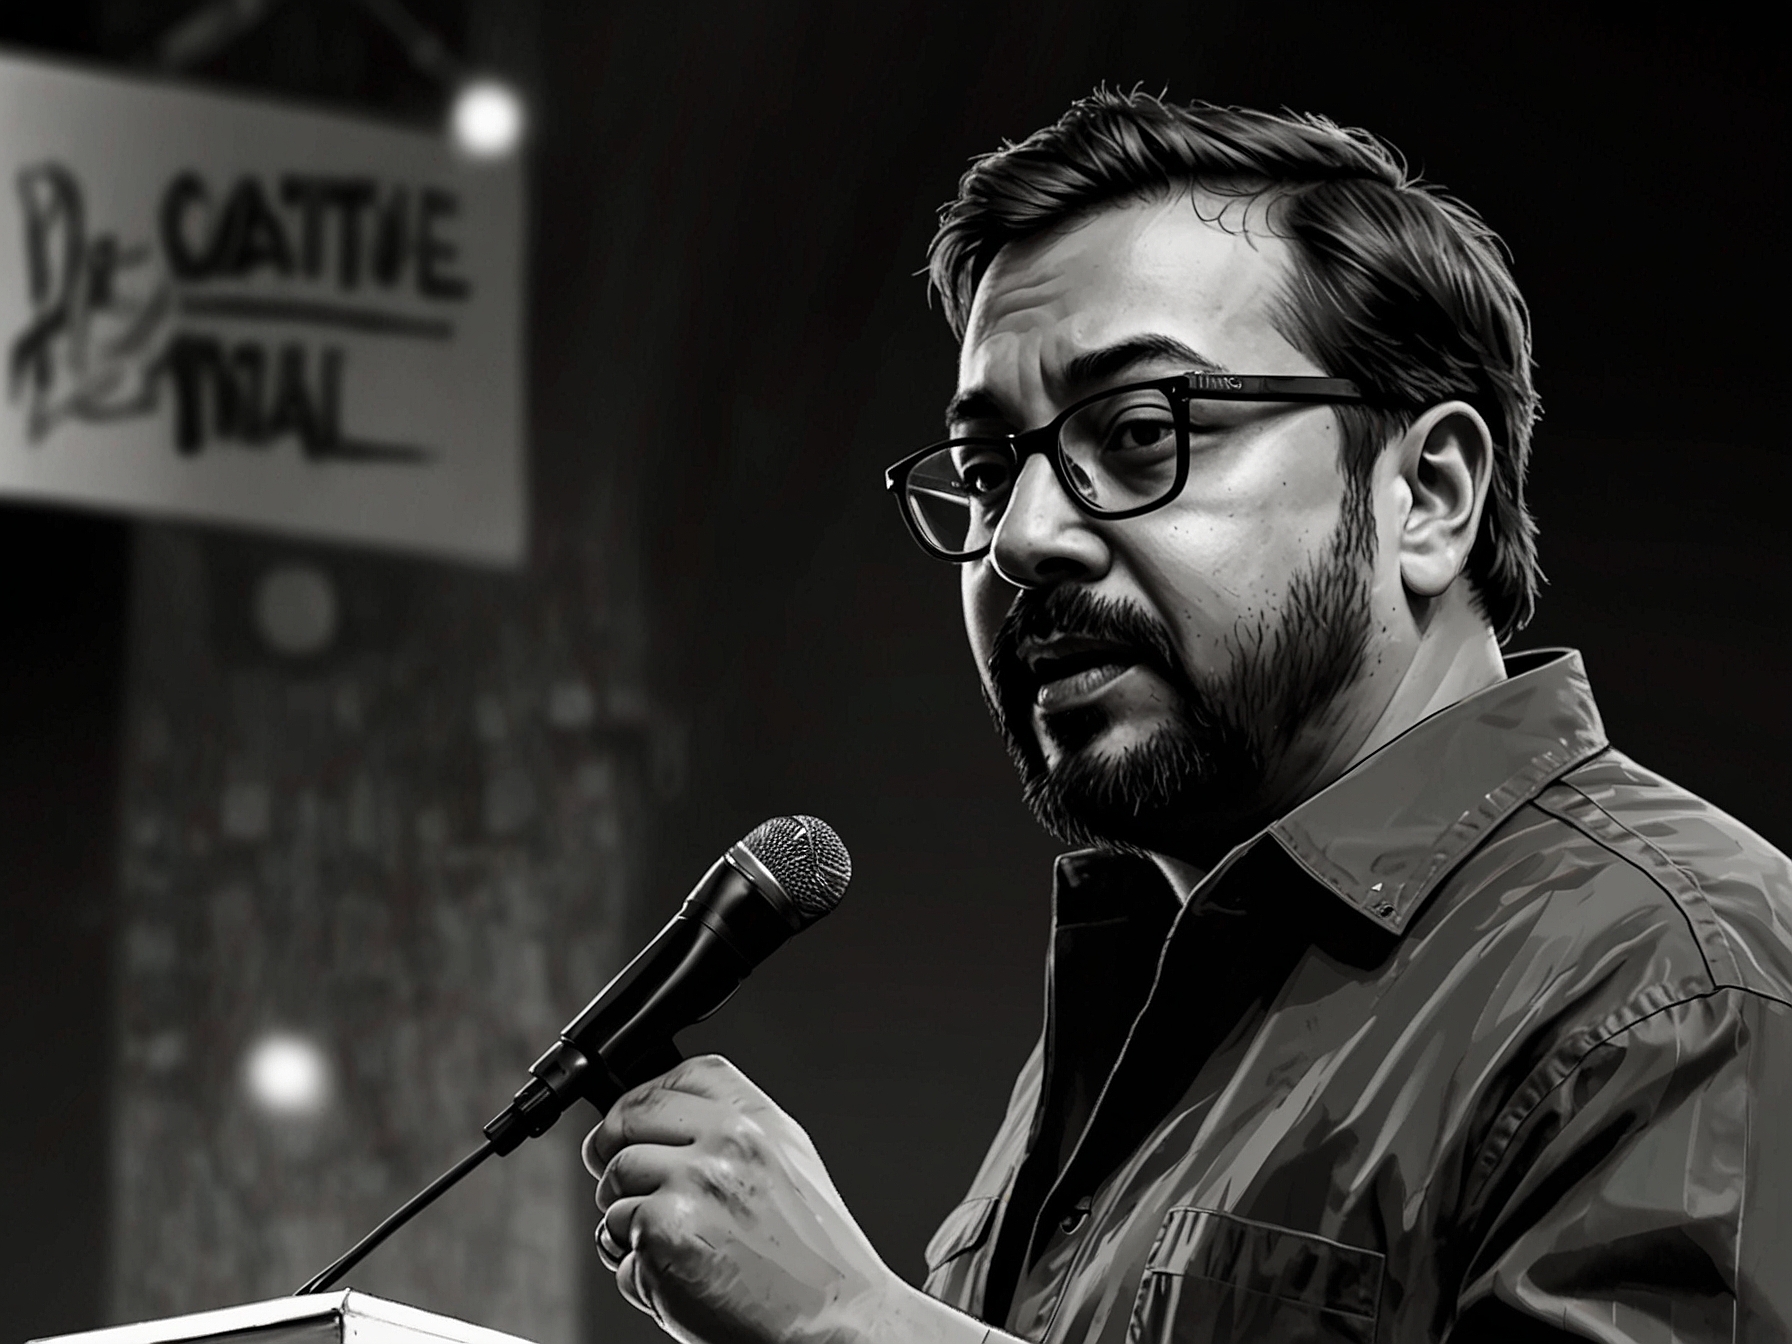 An image showing Anurag Kashyap speaking at a film festival, emphasizing his thoughts on the importance of trained actors over influencers in preserving the quality of cinema.